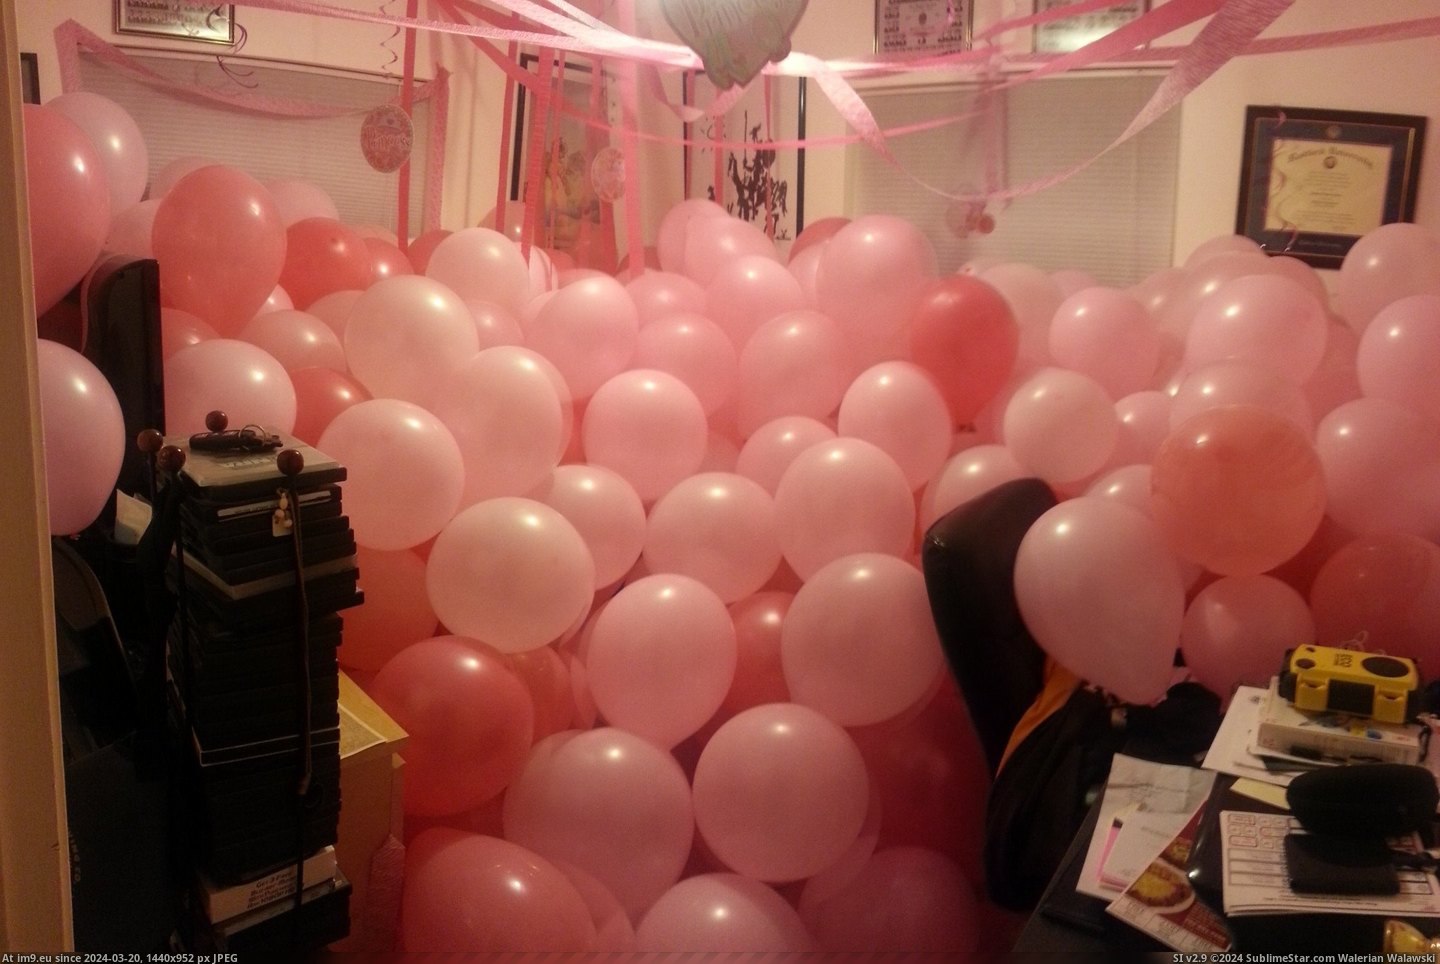 #Funny #One #Out #Roommate #Balloons #Revenge #Room #Got #Town [Funny] My roommate went out of town and came back to 400 balloons in his room. He recently got his revenge when the other one l Pic. (Obraz z album My r/FUNNY favs))